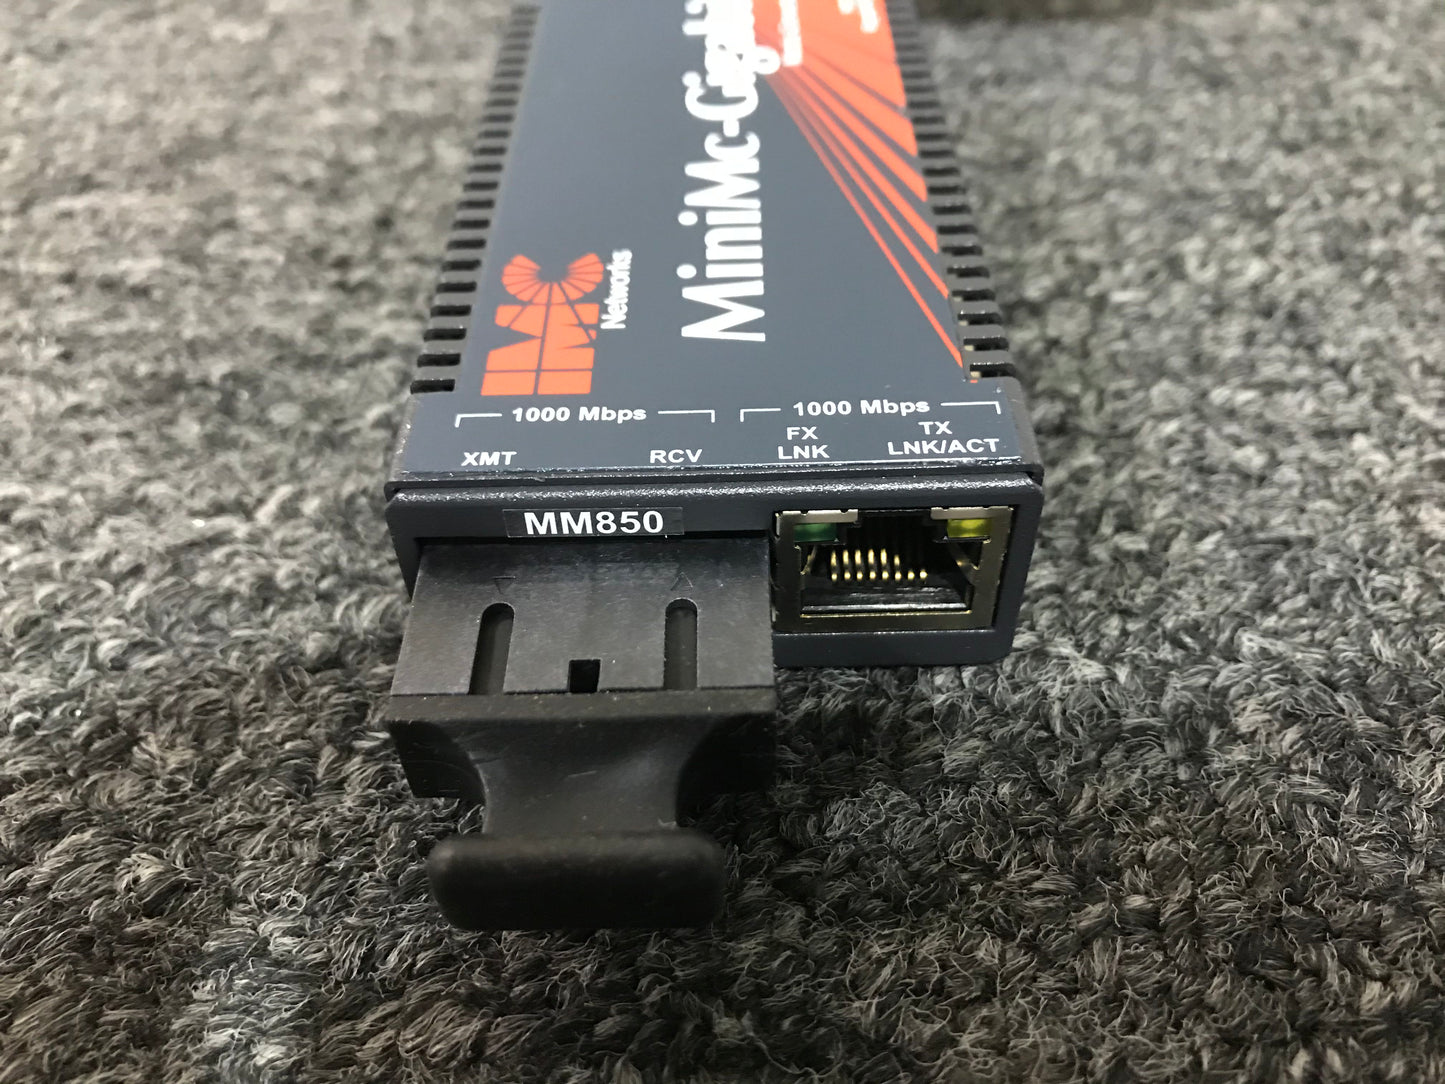 Used IMC MiniMc Gigabit Media Converters, Lot of 3 for Sale, We Sell Professional Audio Equipment. Audio Systems, Amplifiers, Consoles, Mixers, Electronics, Entertainment, Sound, Live.